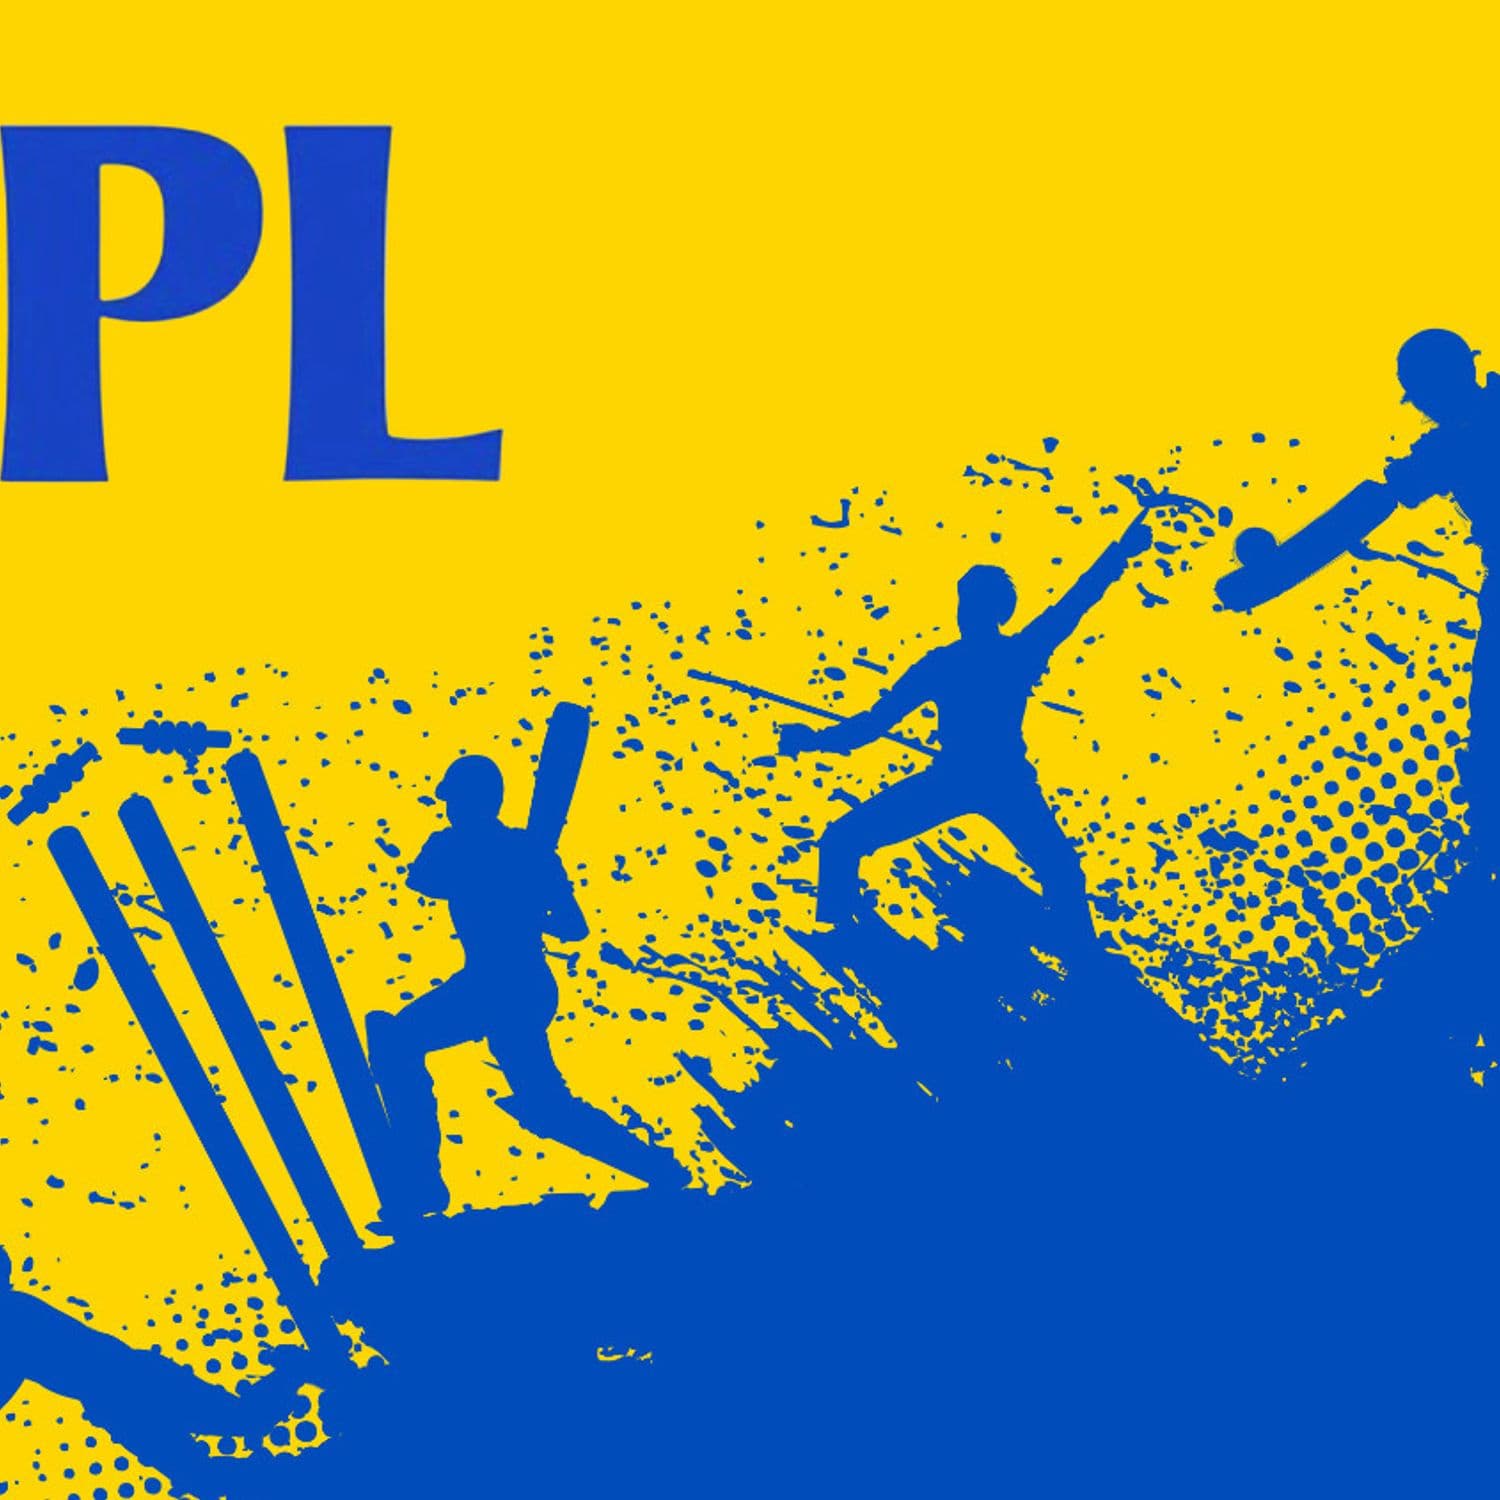 Despite digital growth, broadcasting rights drive IPL’s riches; league valued over $10B now